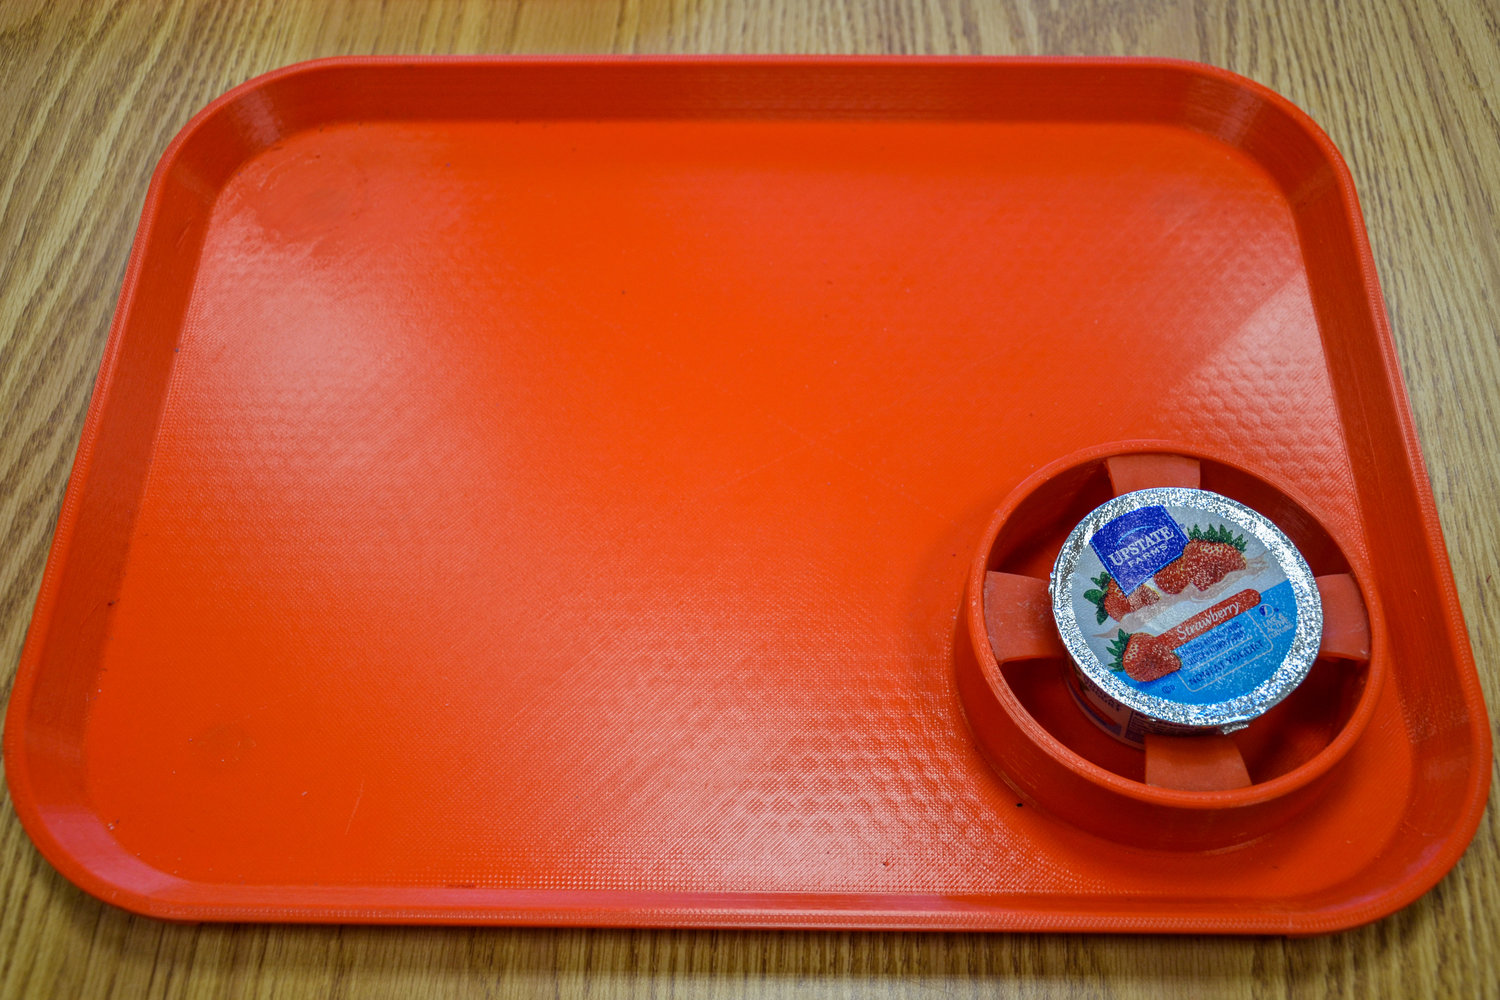 Designed by speech pathologist Ilana Herman, the independent feeding tray features four flaps attached to a molded cup and is meant to help those struggling with neurological and orthopedic injuries eat independently. The tray is still in development. .